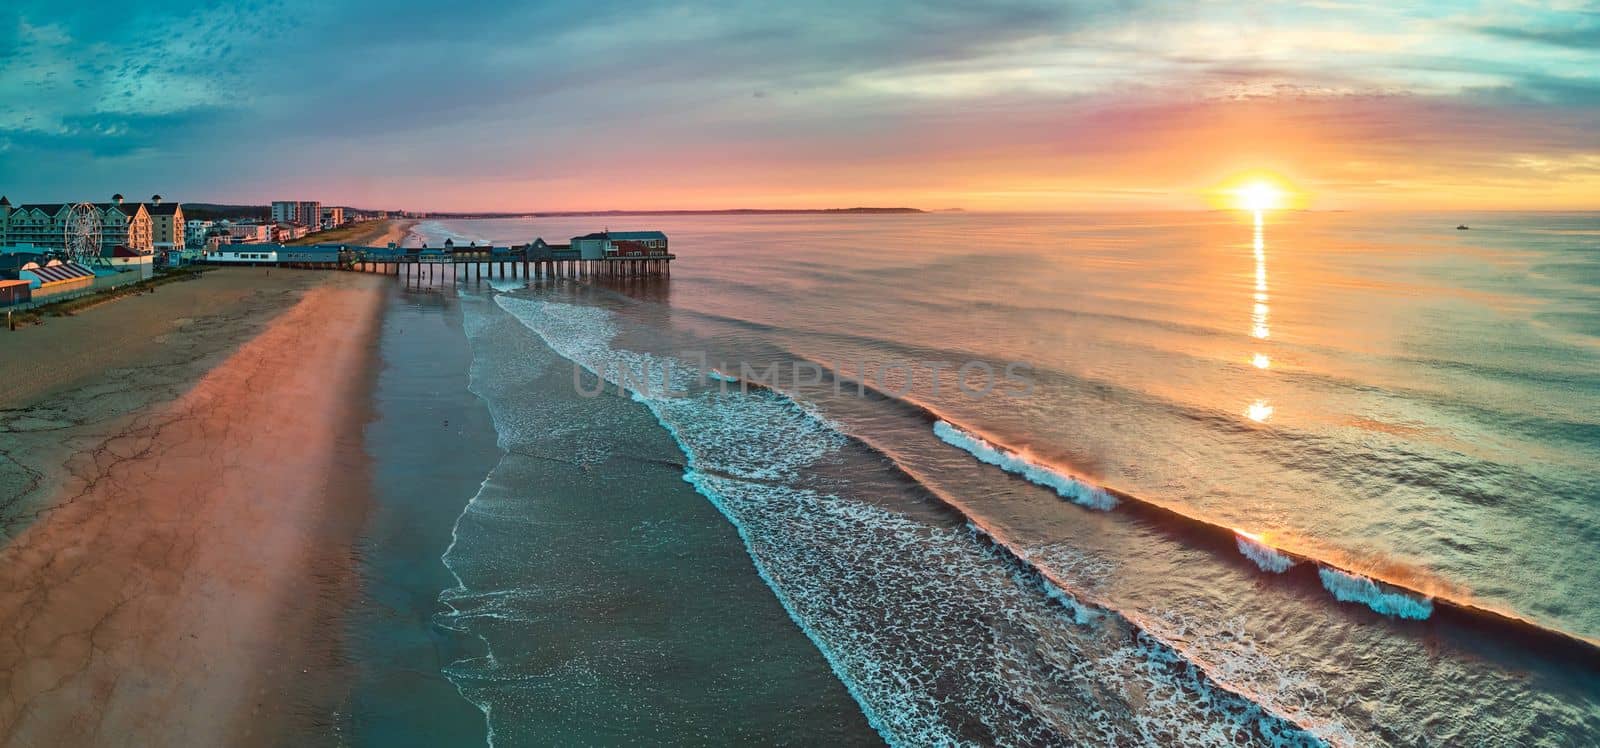 Wood pier, beach, and shops with ocean waves from above during sunrise light by njproductions